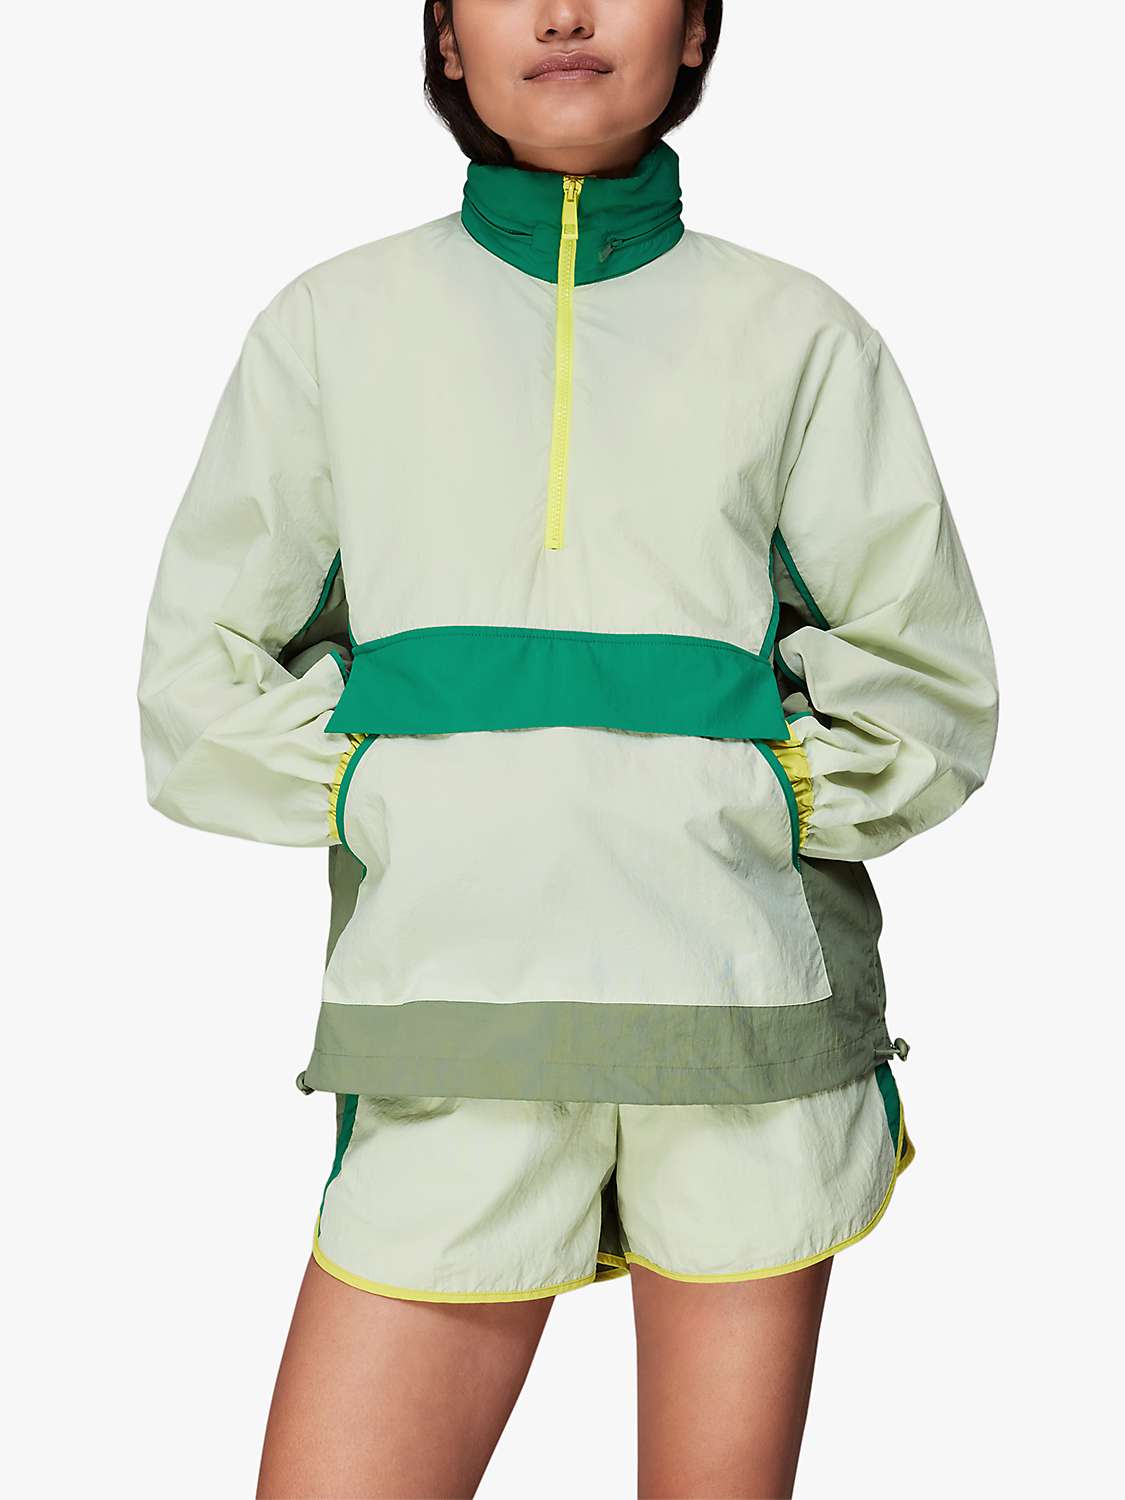 Buy Whistles Colour Block Anorak Sports Top, Green/Multi Online at johnlewis.com